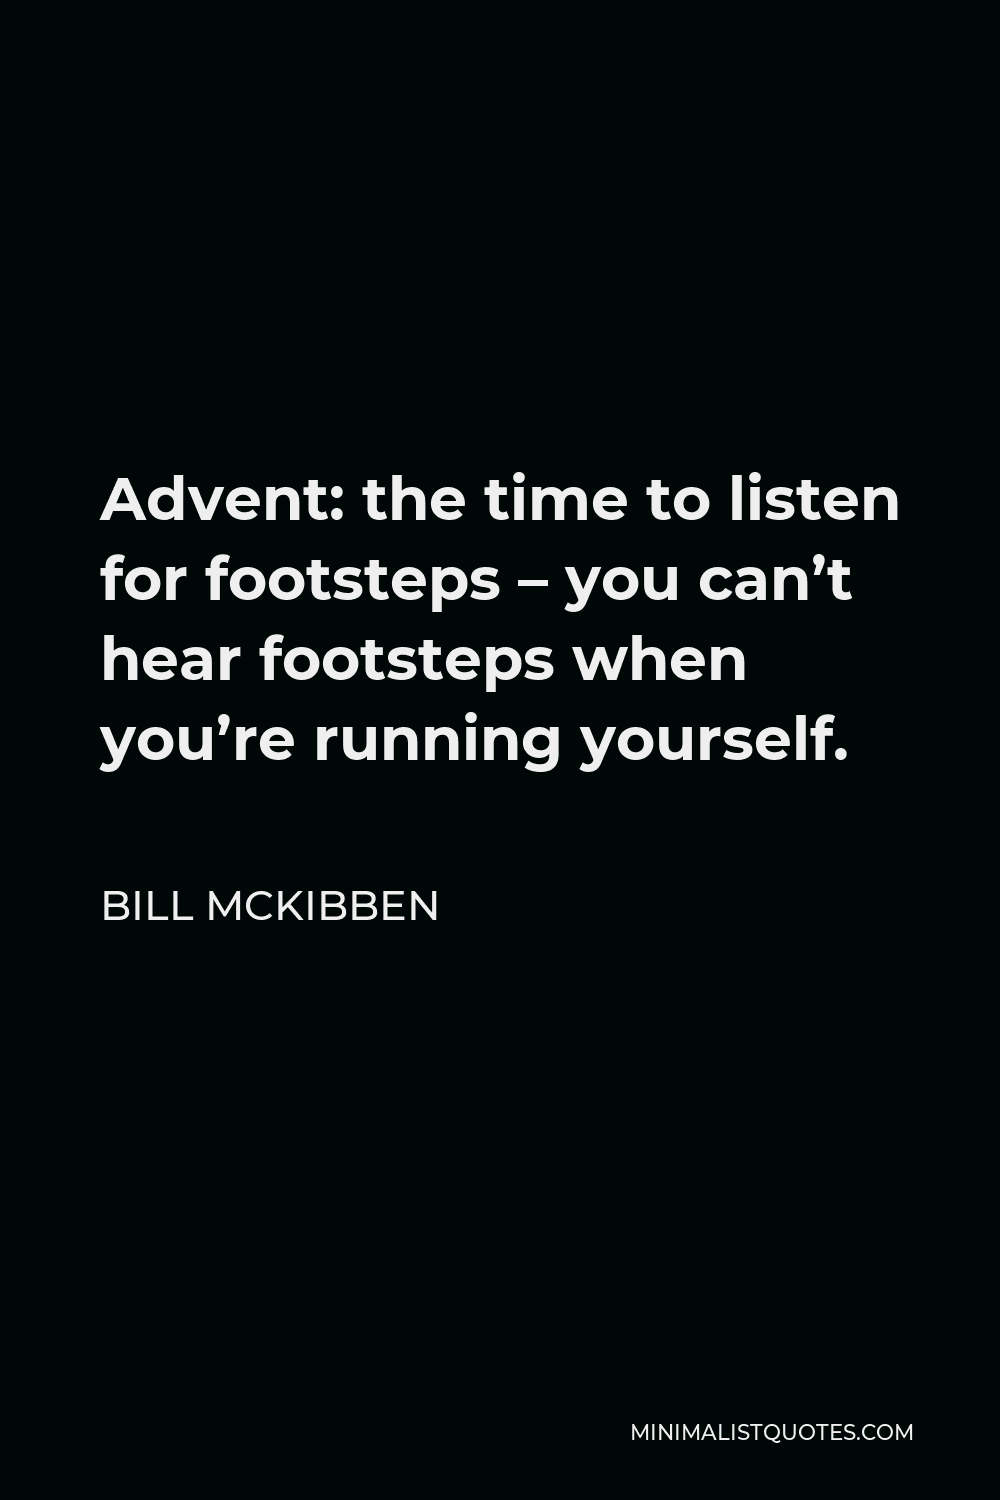 Bill McKibben Quote - Advent: the time to listen for footsteps – you can’t hear footsteps when you’re running yourself.